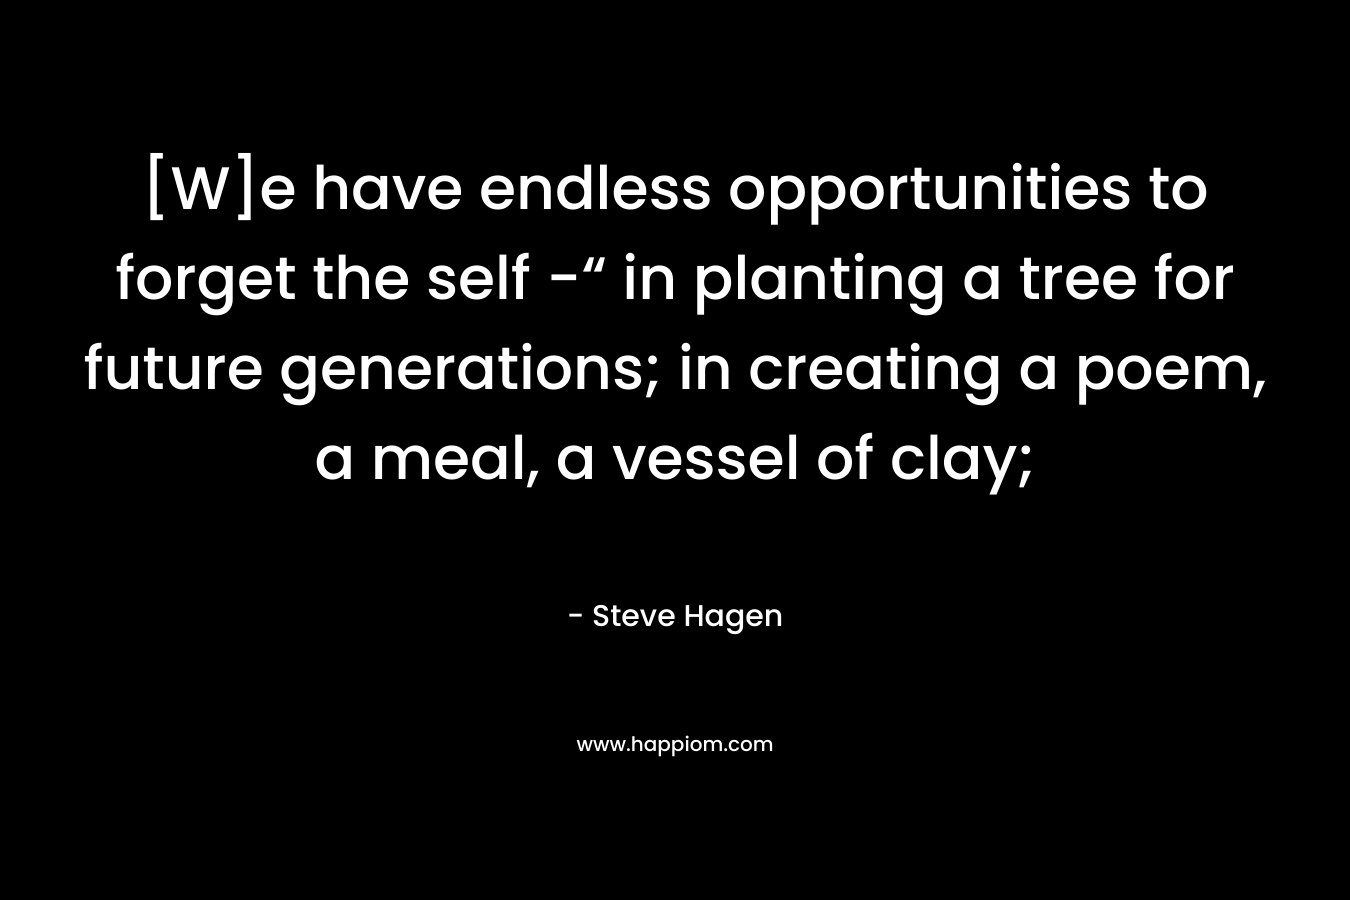 [W]e have endless opportunities to forget the self -“ in planting a tree for future generations; in creating a poem, a meal, a vessel of clay;